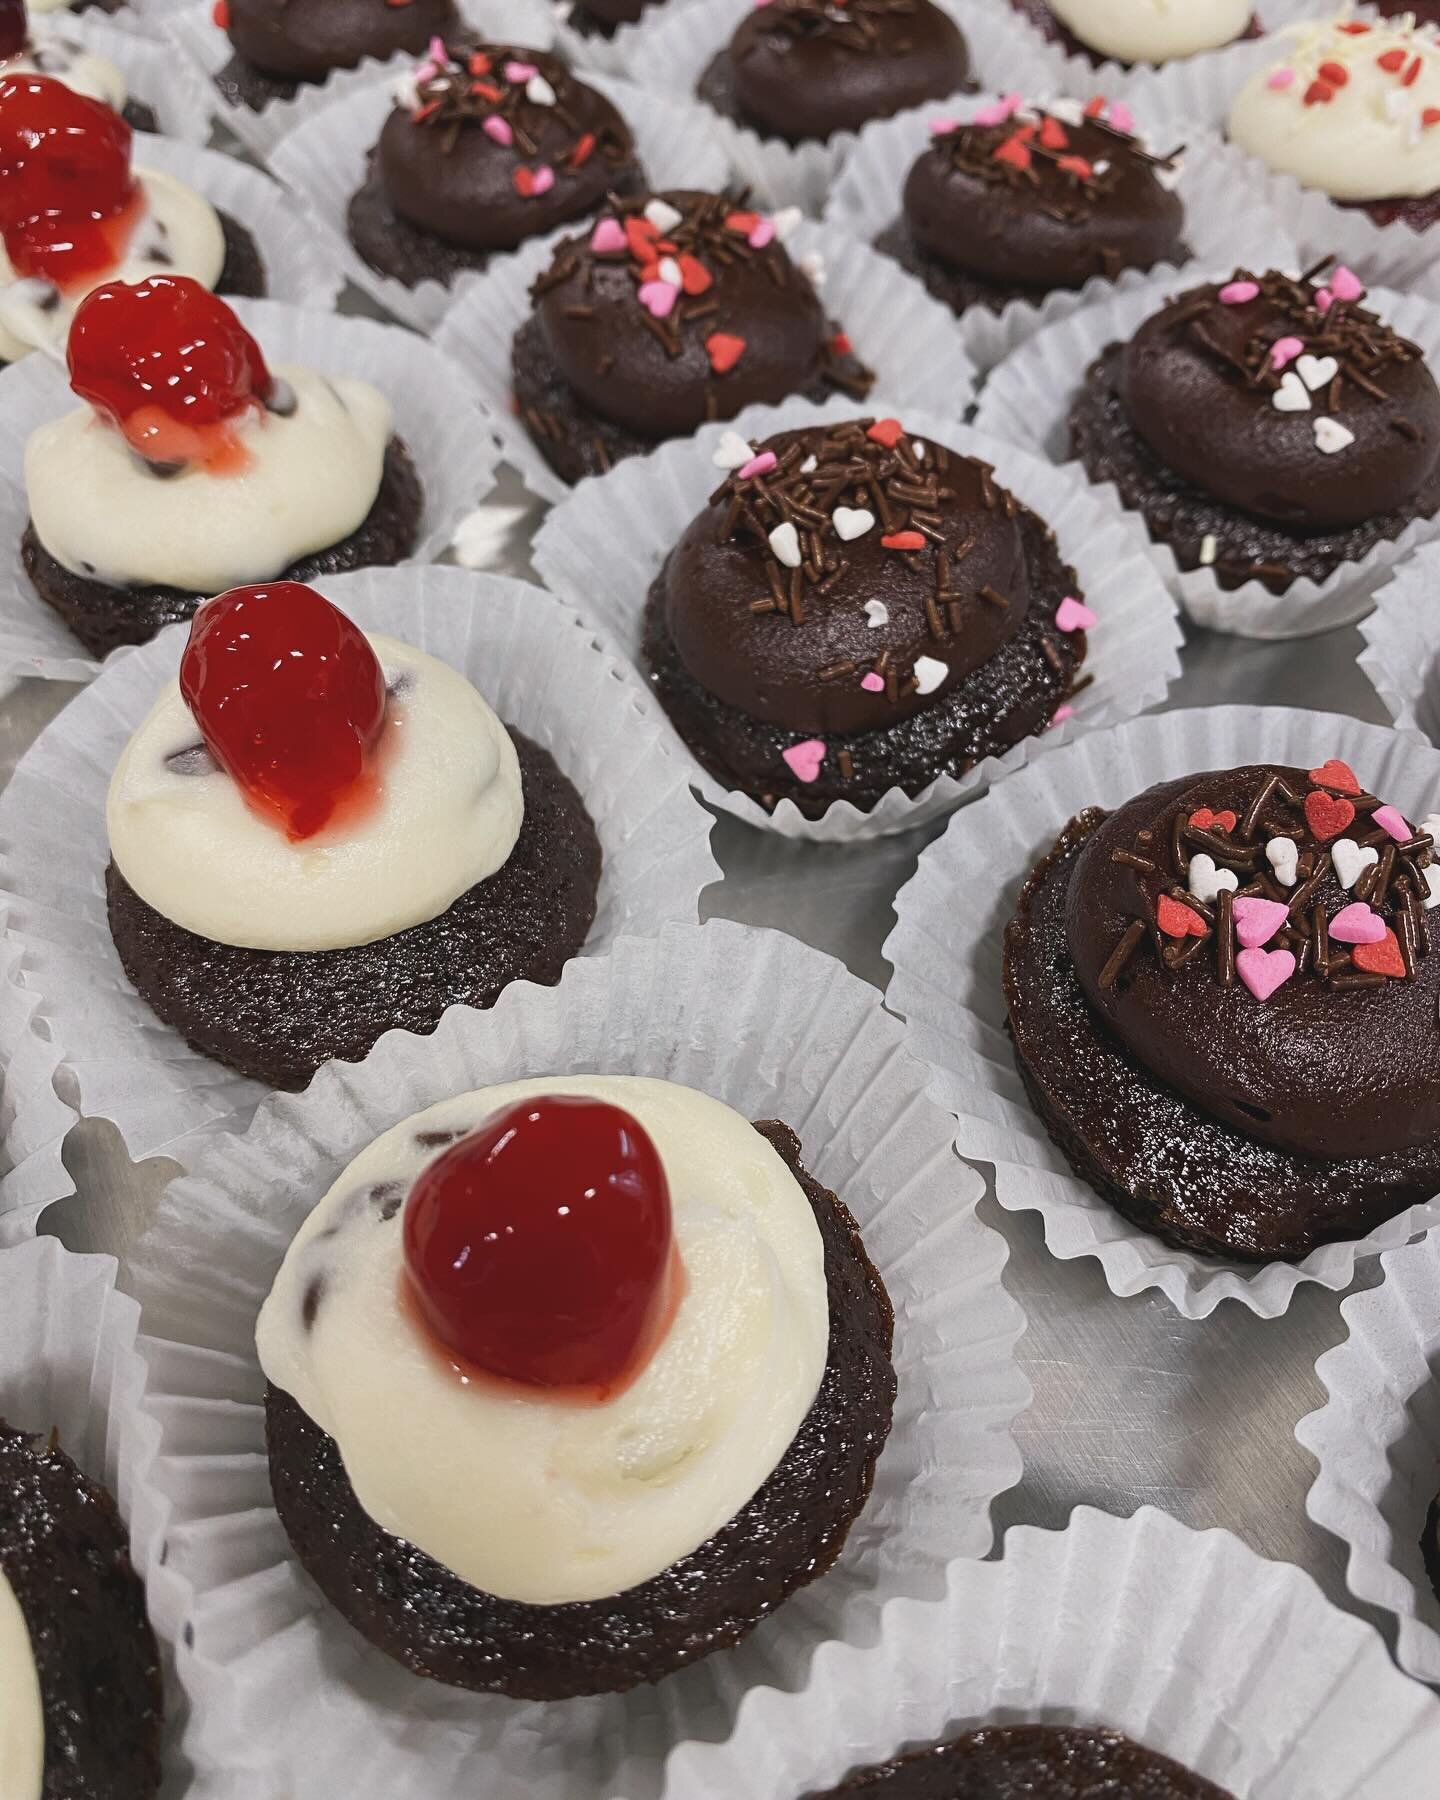 We&rsquo;re ready for the Chocolate Festival in #BelmontShore today! Chocolate tasting up and down 2nd Street starts at 1pm until everyone sells out. We&rsquo;re serving Frosted Bites of our Chocolate Cherry Chip with Vanilla Chocolate Chip Buttercre